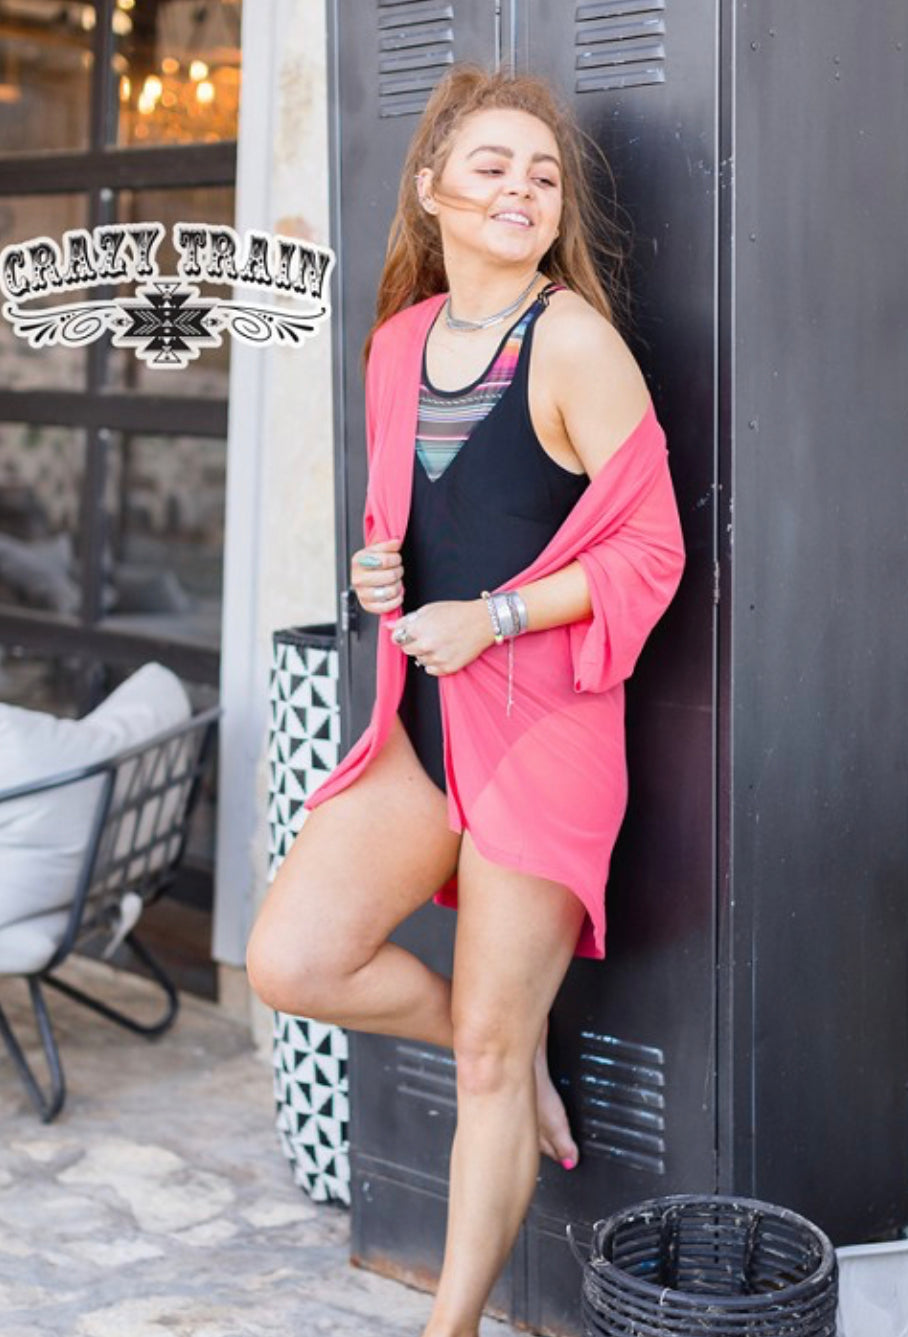 Creek Bed One Piece Swimsuit - Forever Western Boutique